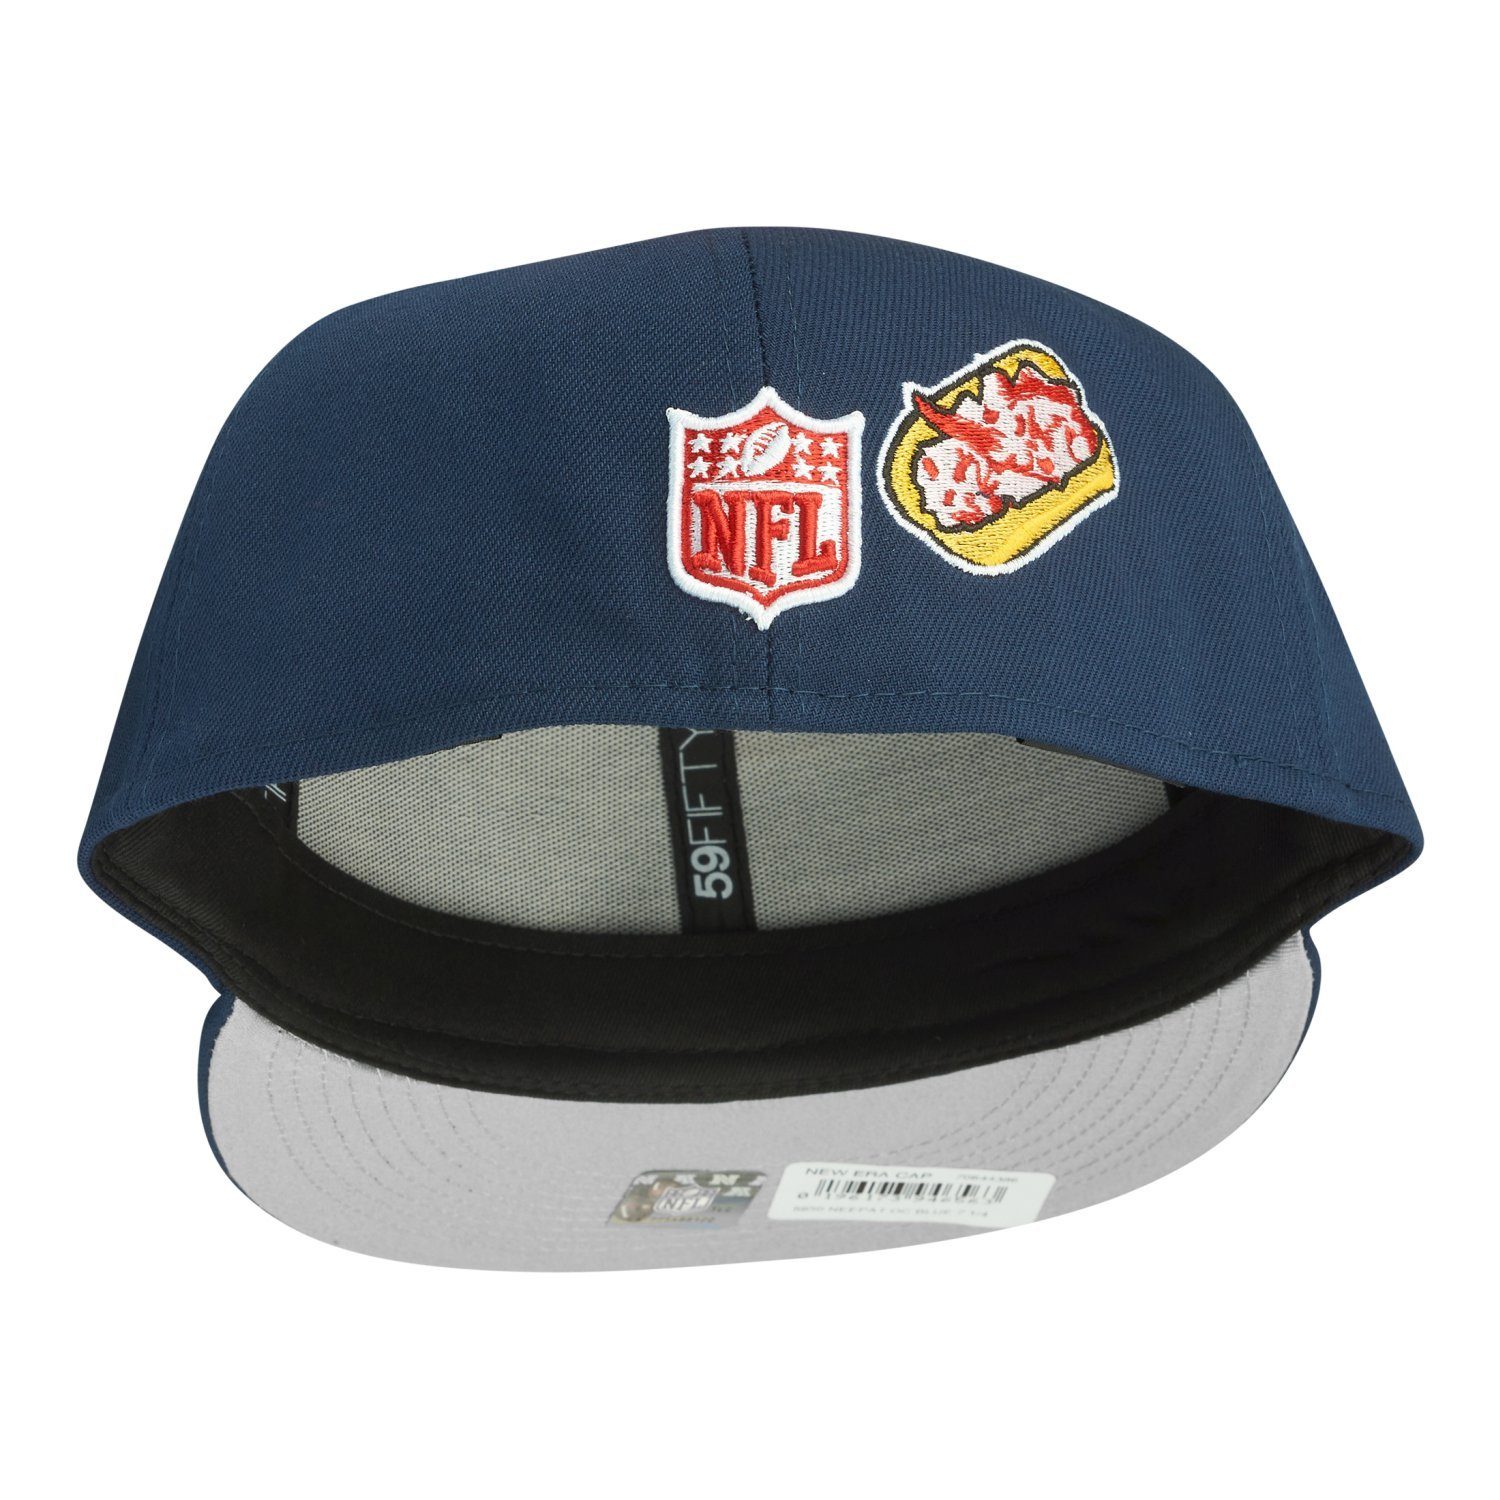 New New Era 59Fifty England Fitted Cap CITY NFL Patriots